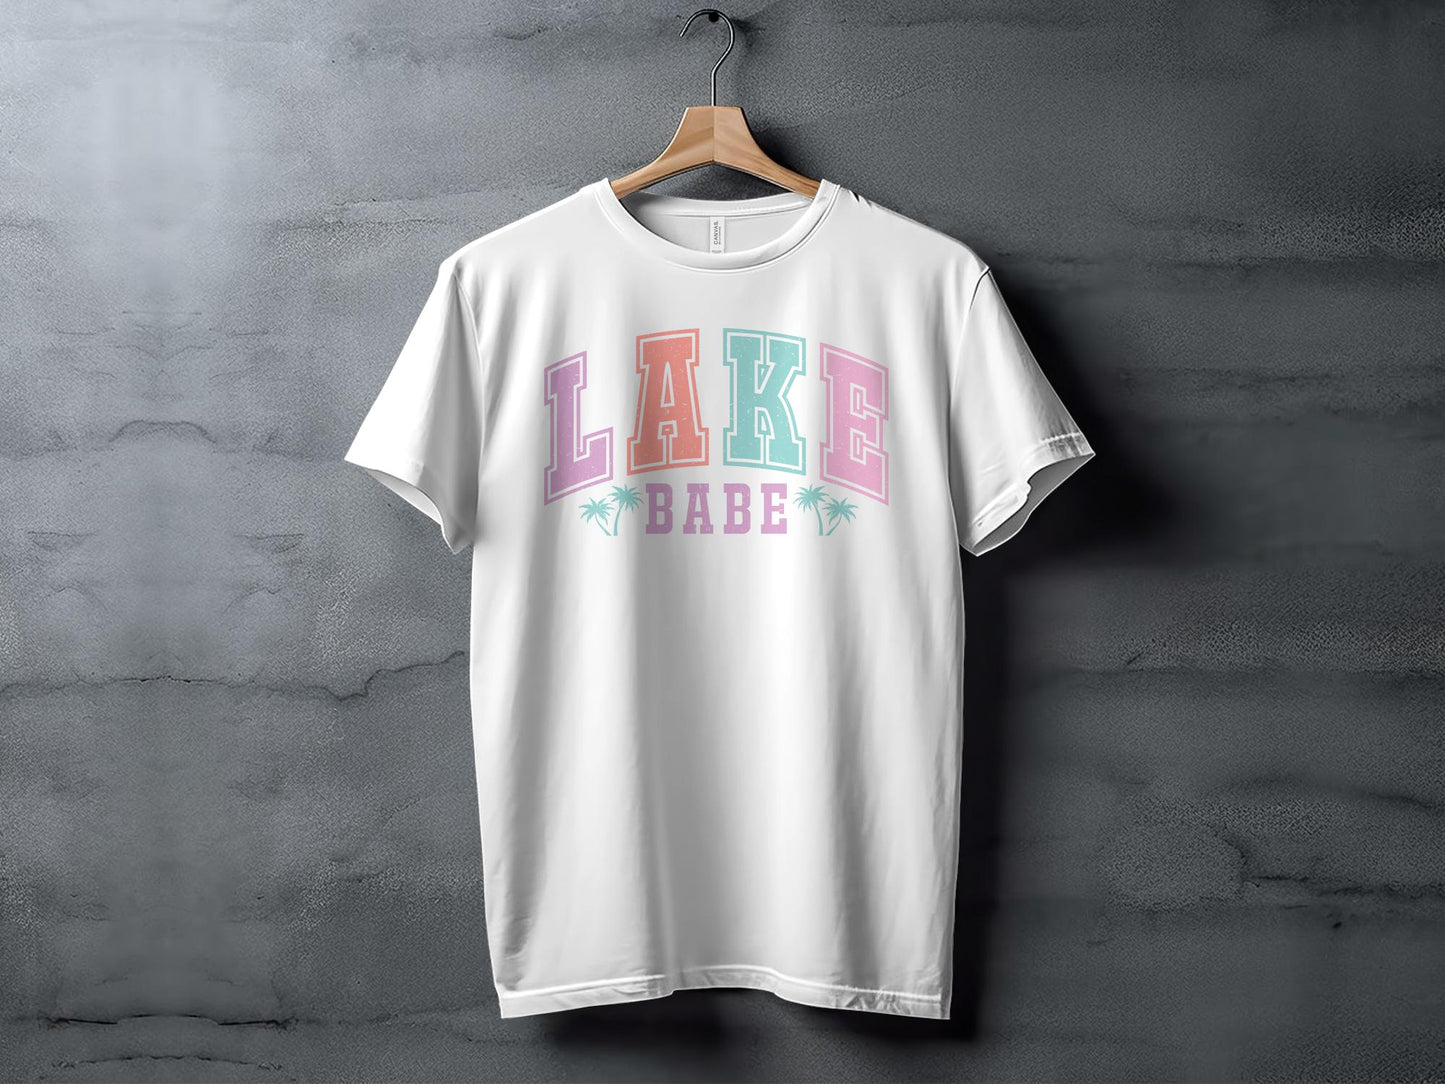 Summer Lake Babe T-Shirt, Retro Palm Tree Graphic Tee, Casual Women's Vacation Top, Fun Beach Shirt, Vintage Style Comfort Wear